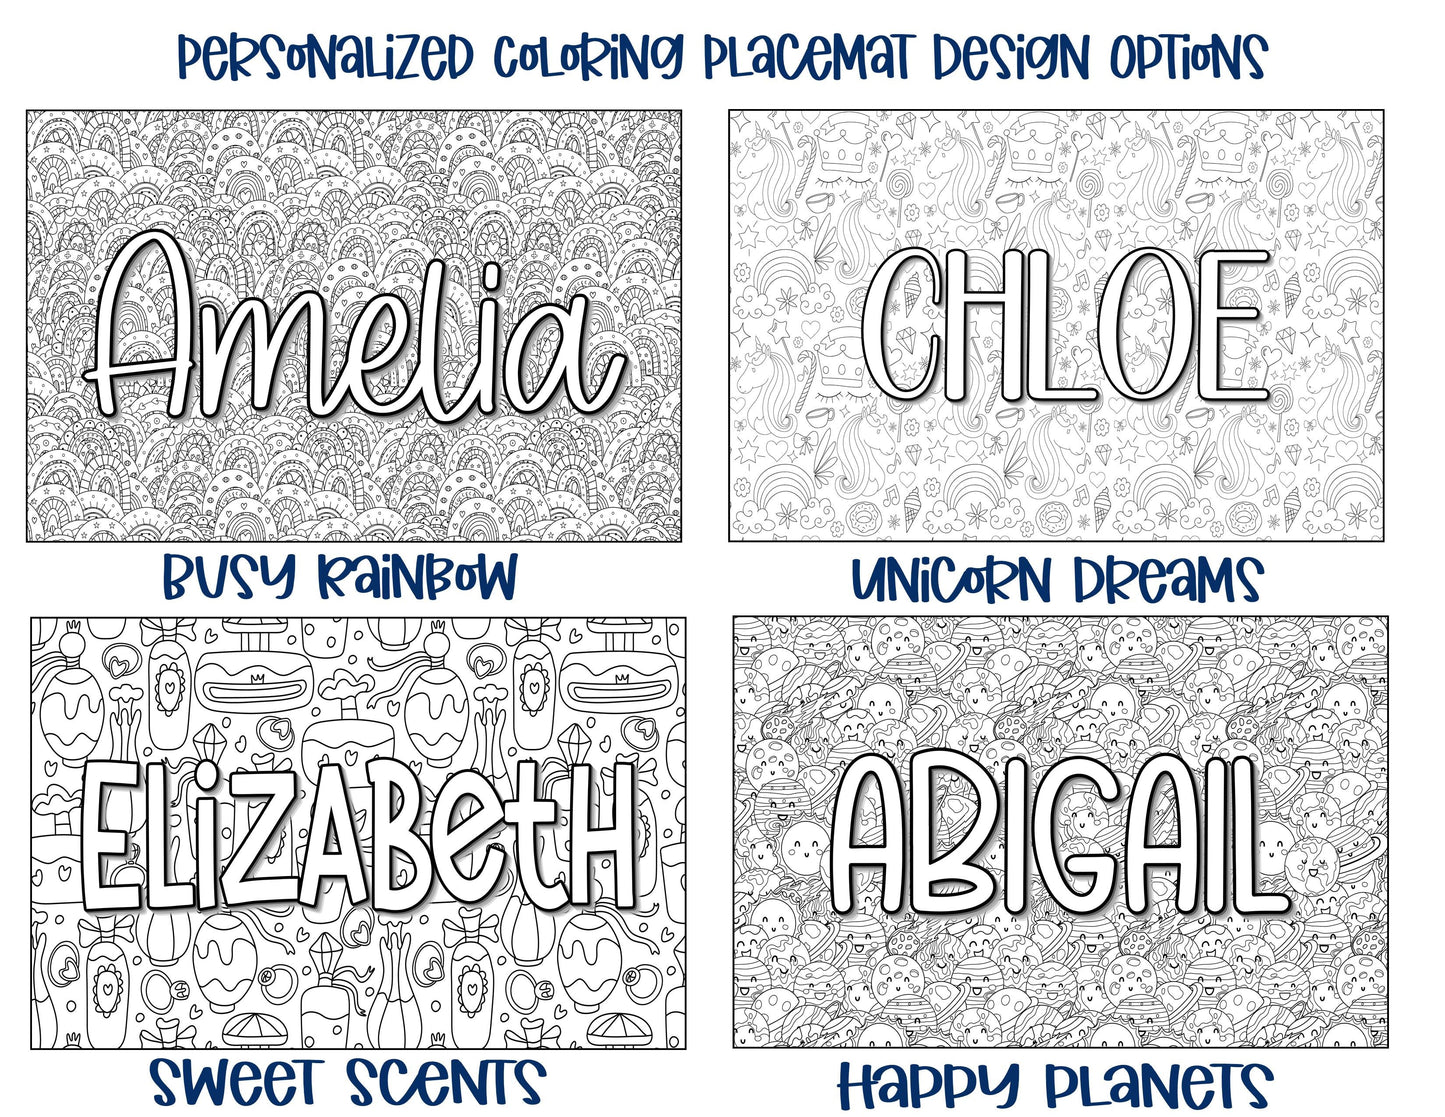 Personalized Coloring Name Placemat - Crazy Cats